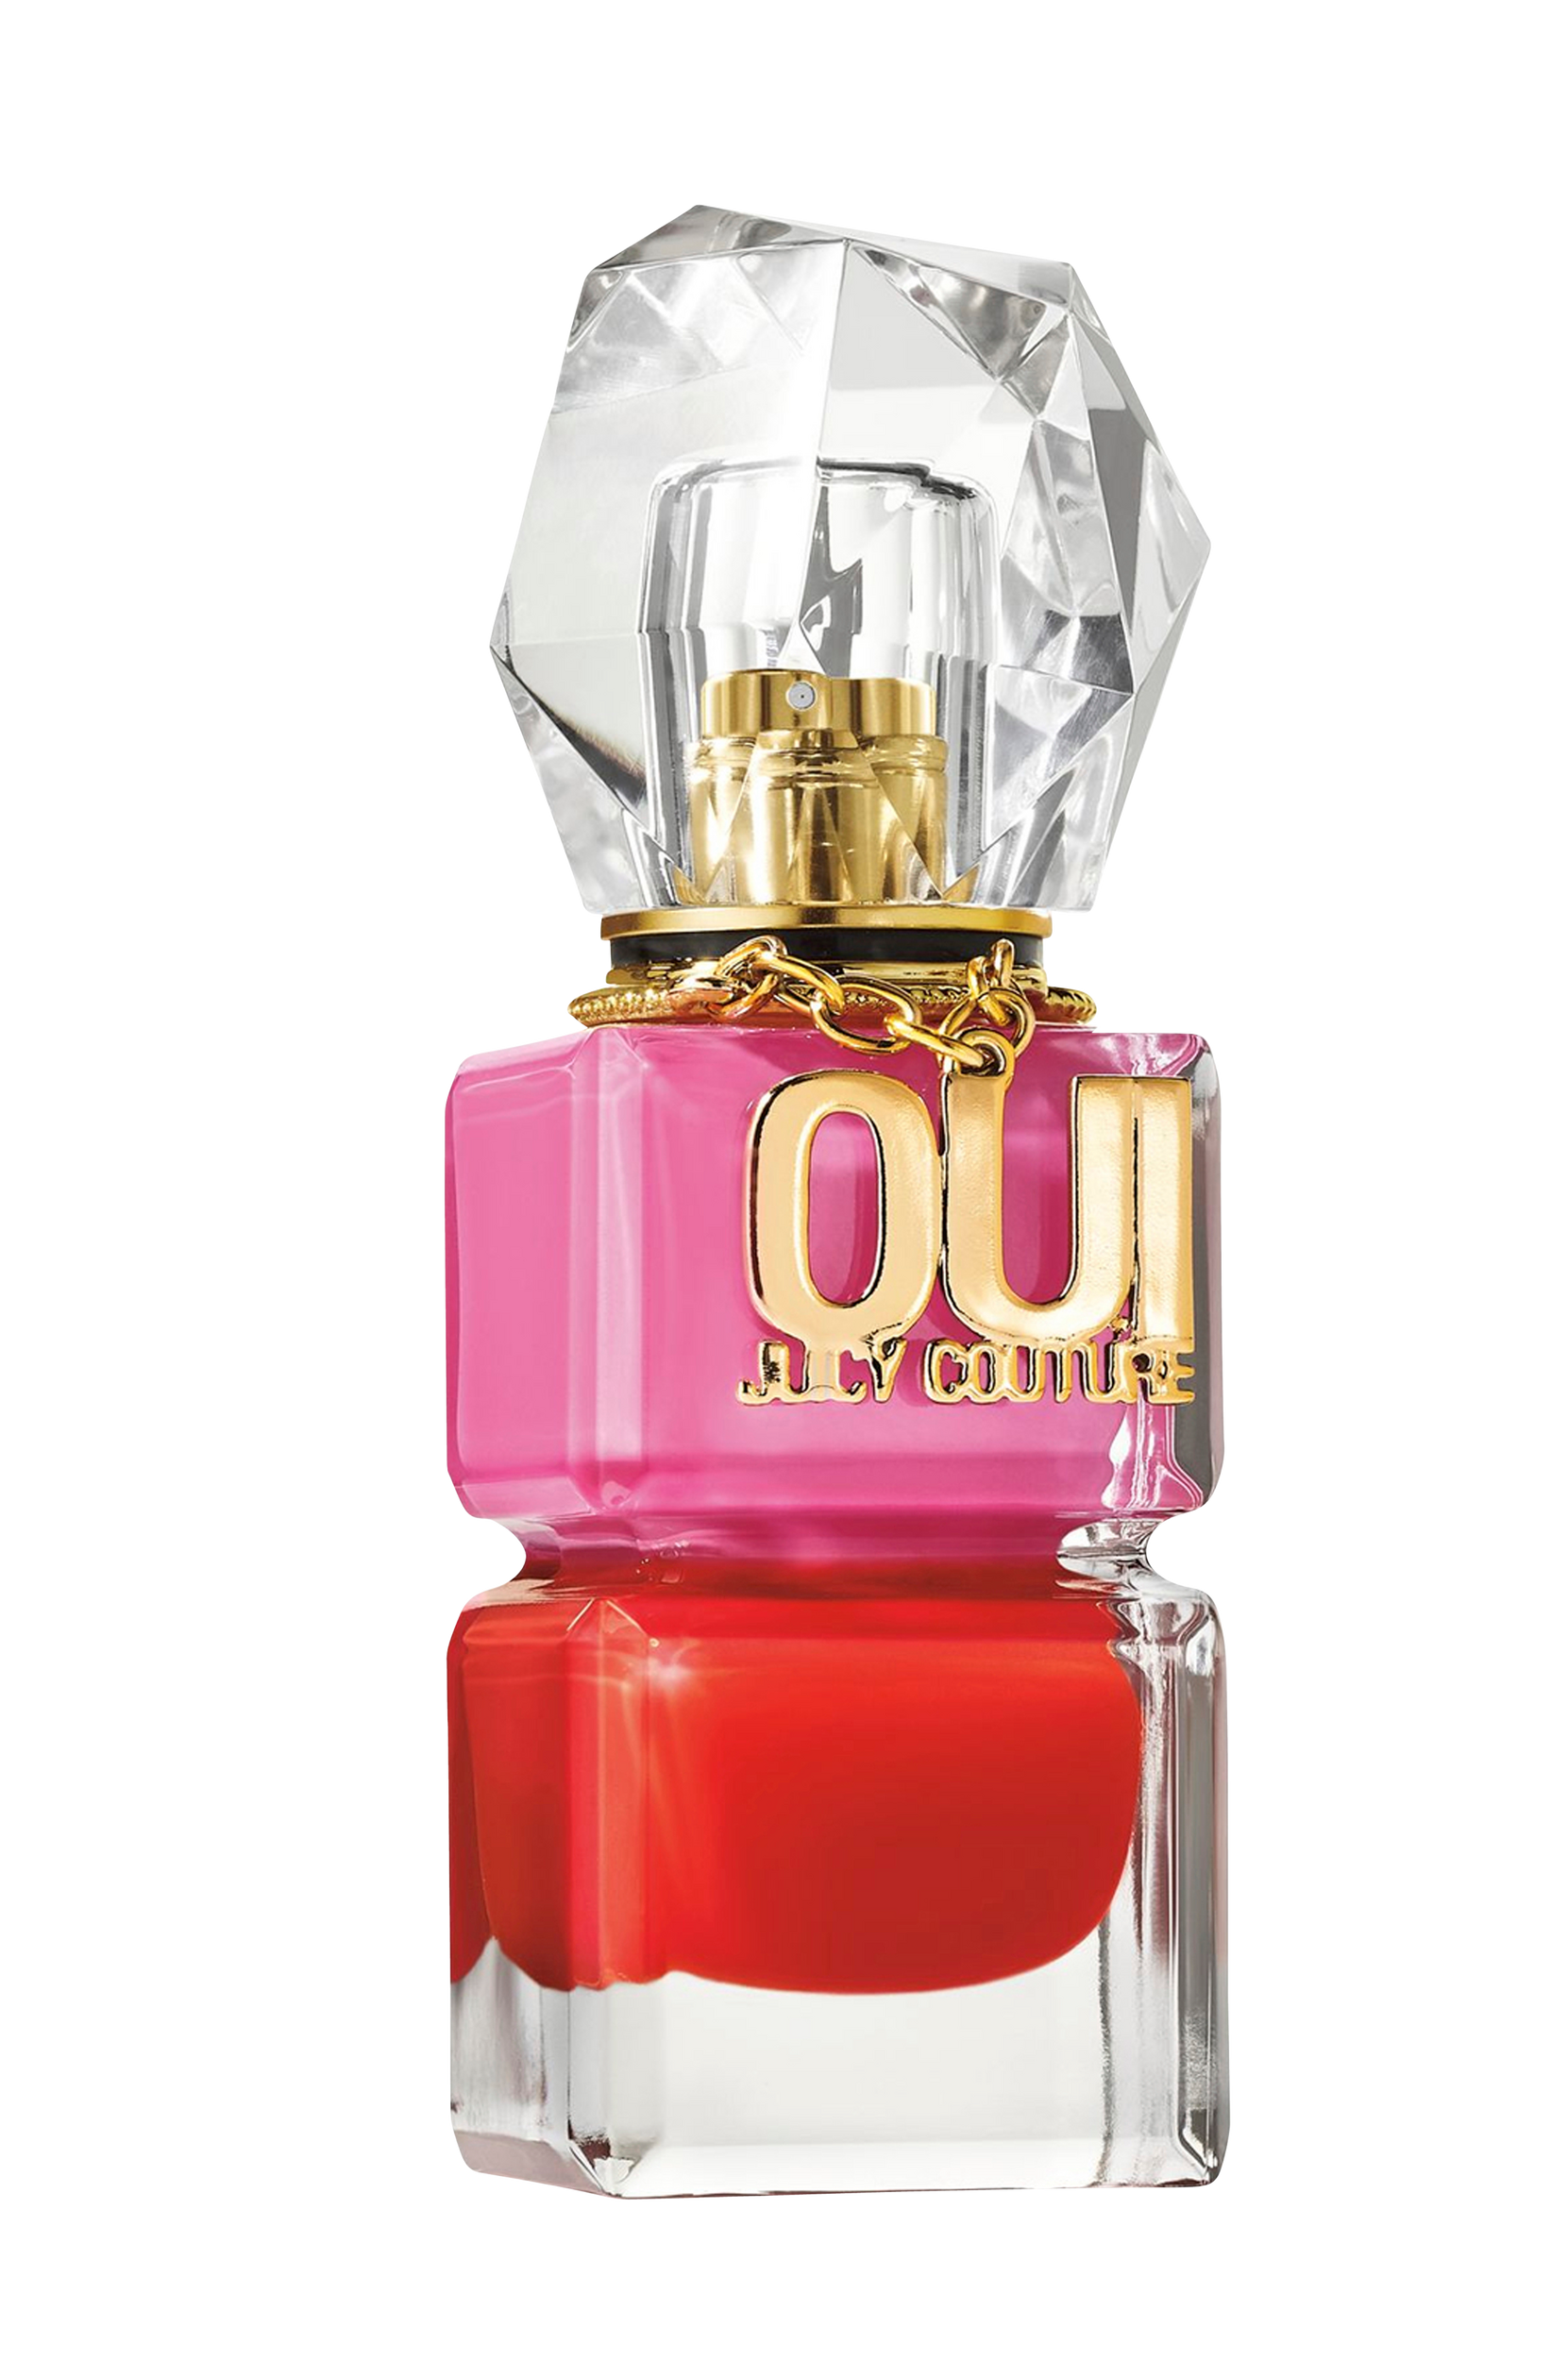 Oui Juicy Couture EdP 50 ml, Juicy Couture